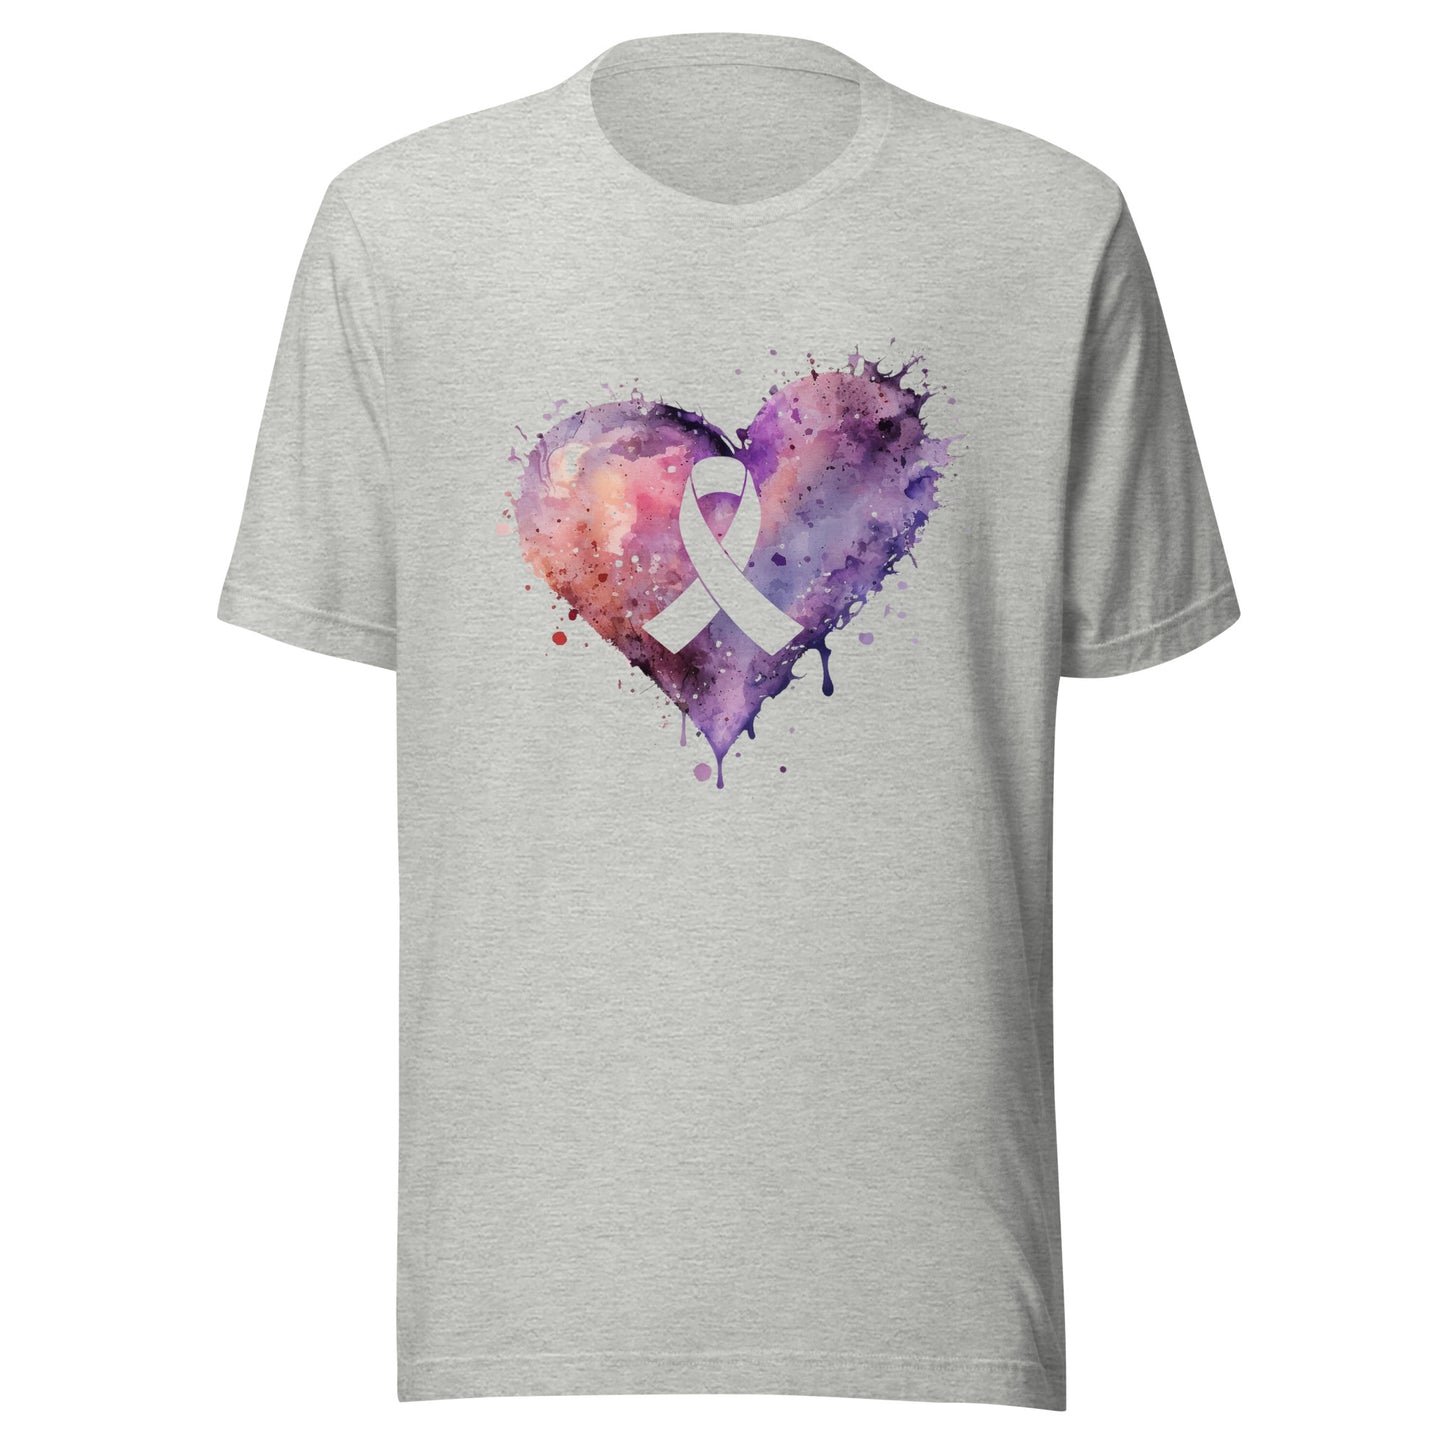 Ribbon in Center of Heart - Cancer - Digital Watercolor Graphic Design Unisex T-shirt